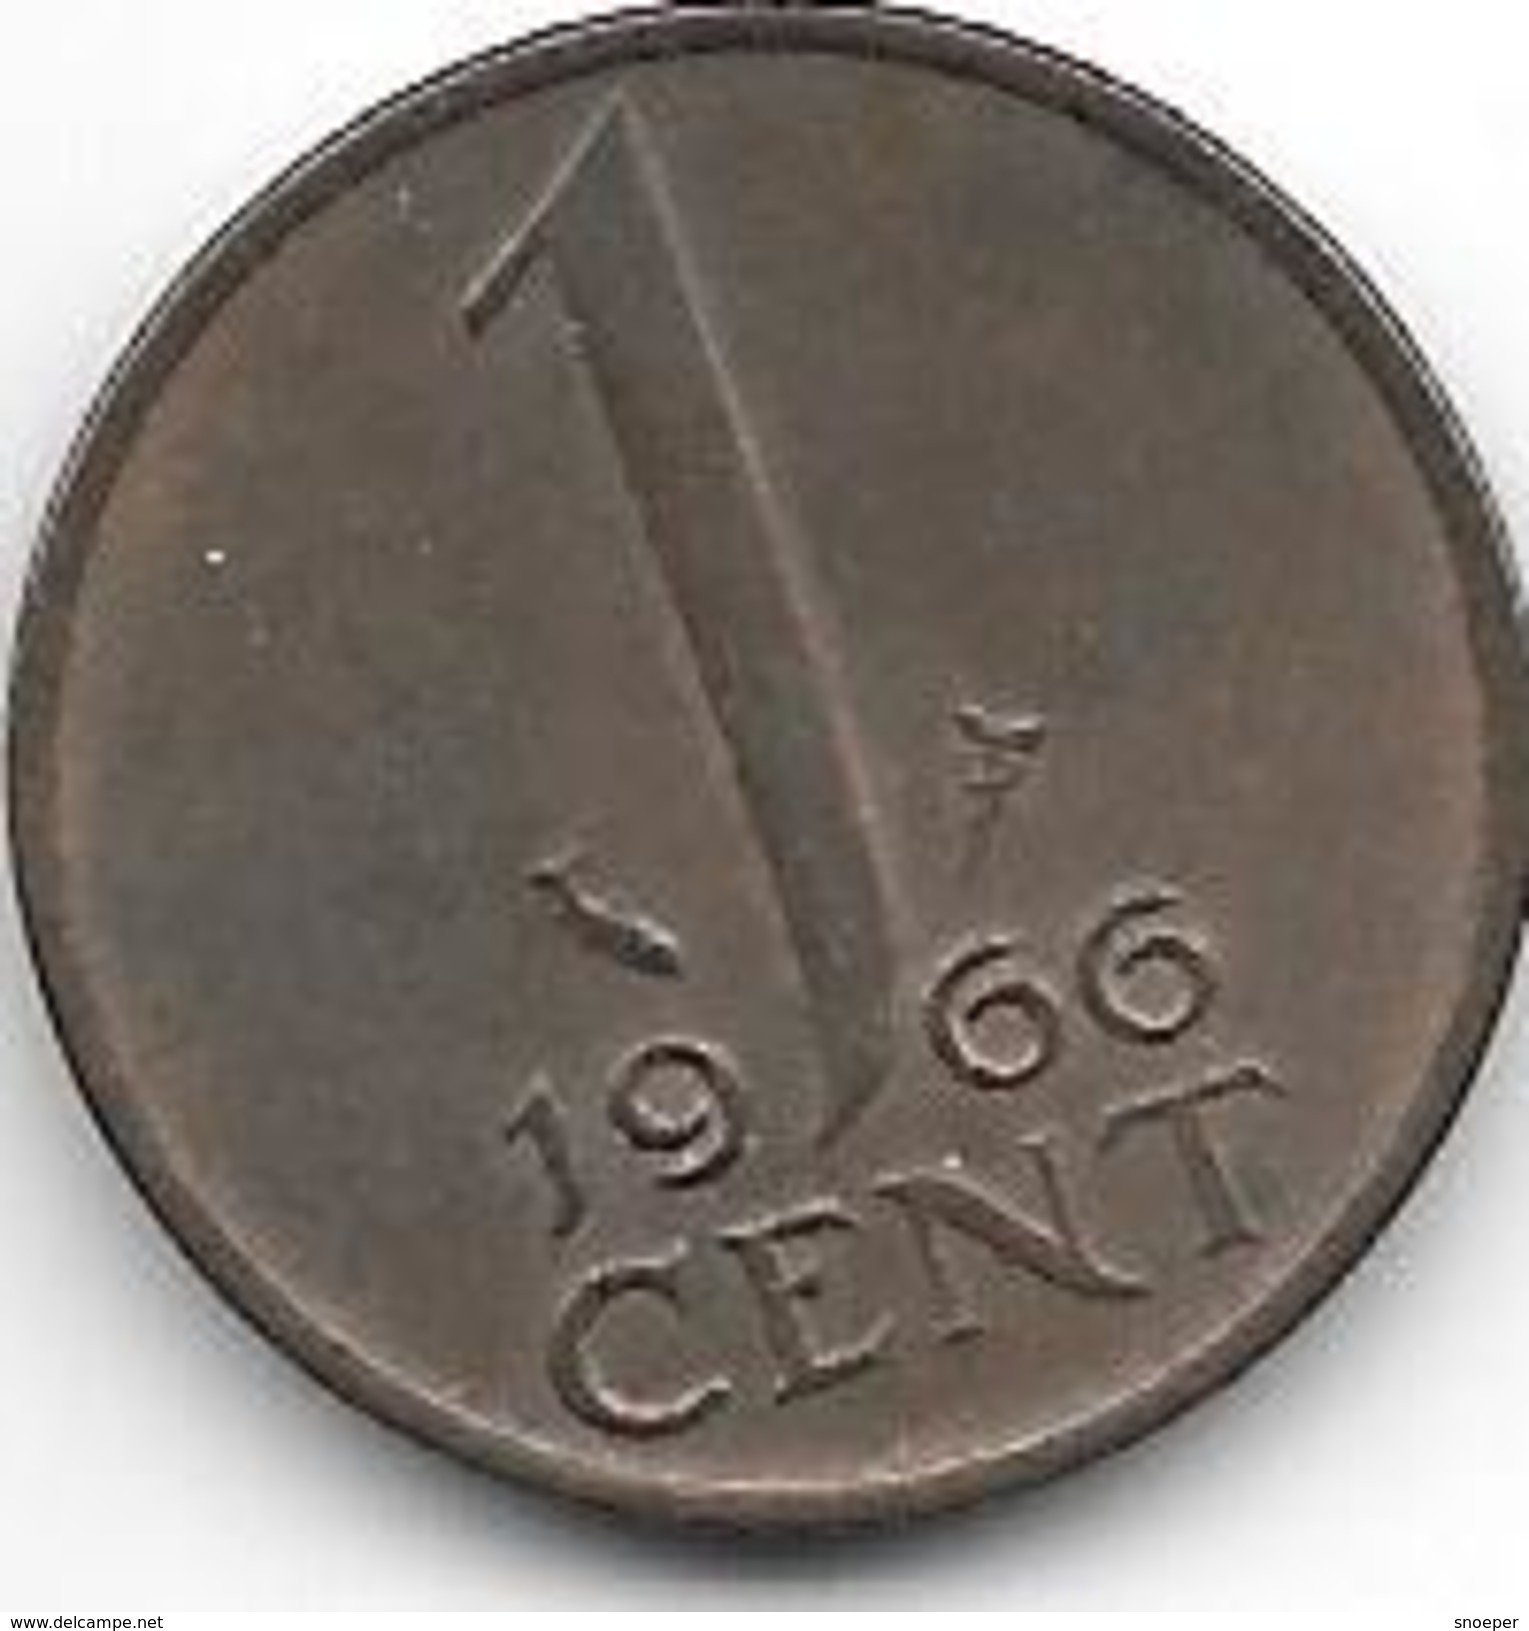 Netherlands 1 Cent 1966 Small Date Km 180   Xf+ - 1 Cent